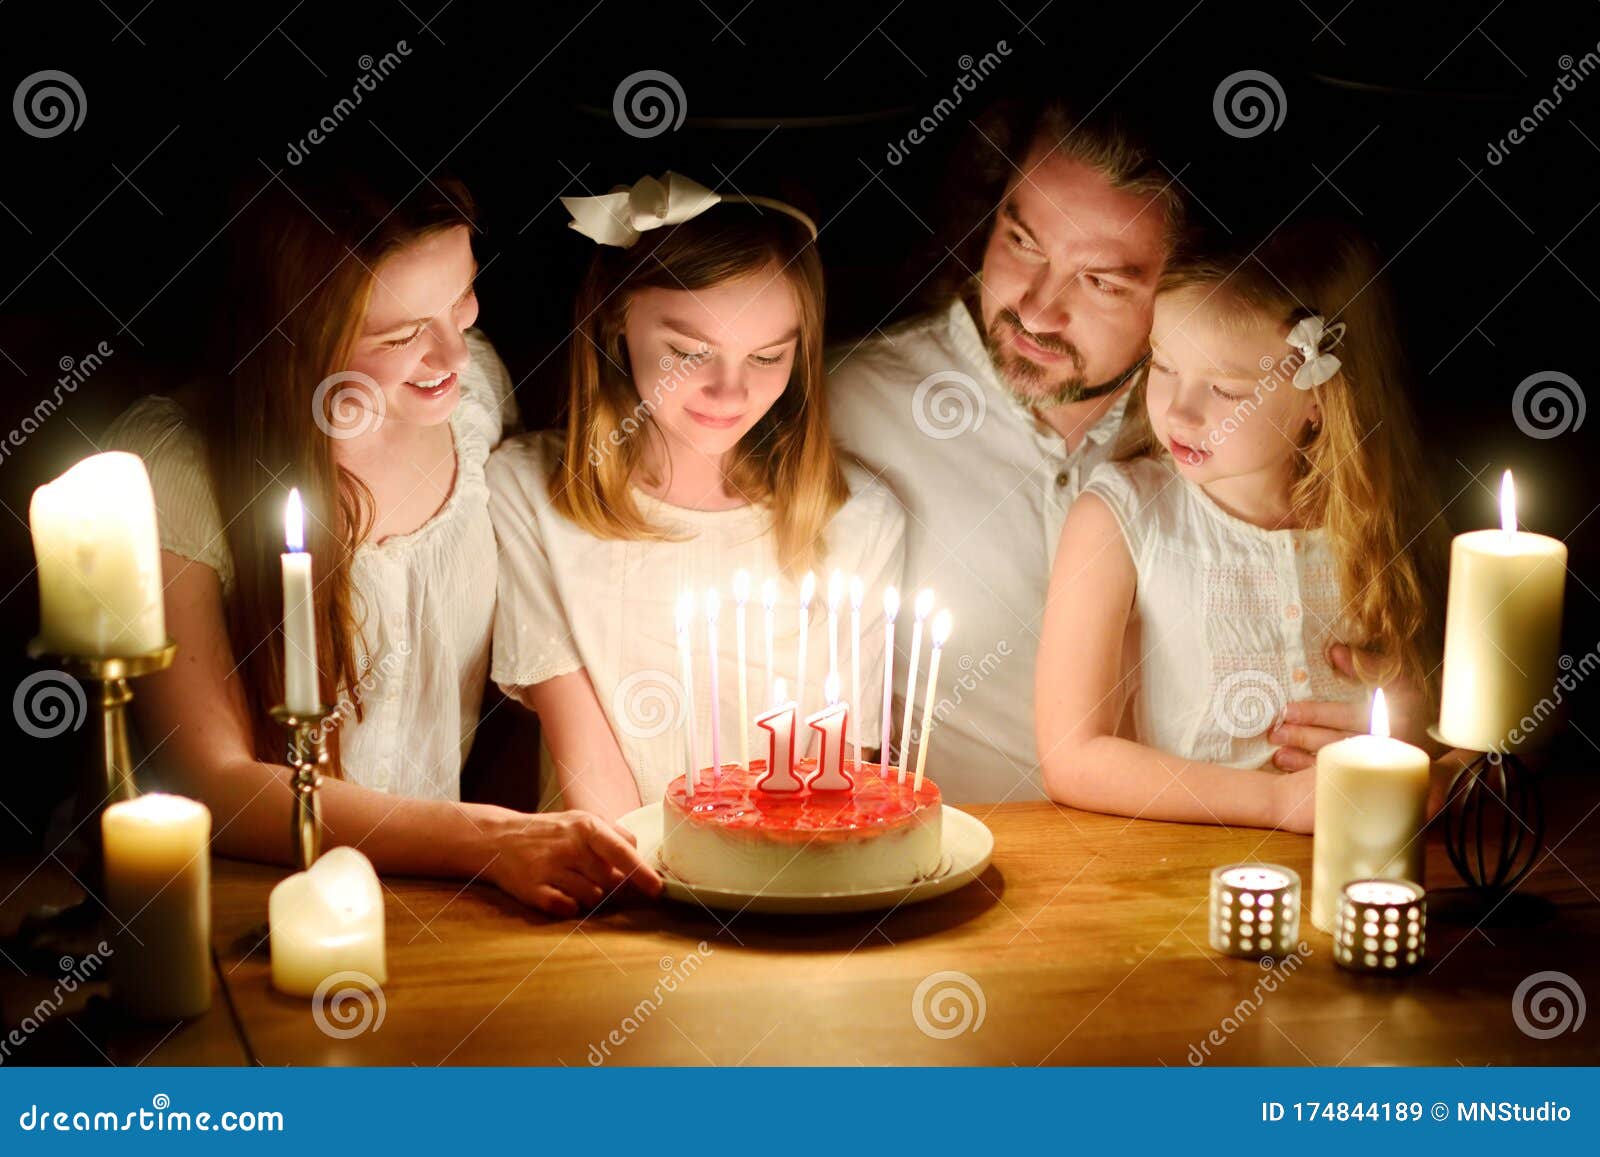 Cute Eleven Years Old Girl Making a Wish before Blowing Candles on Her ...